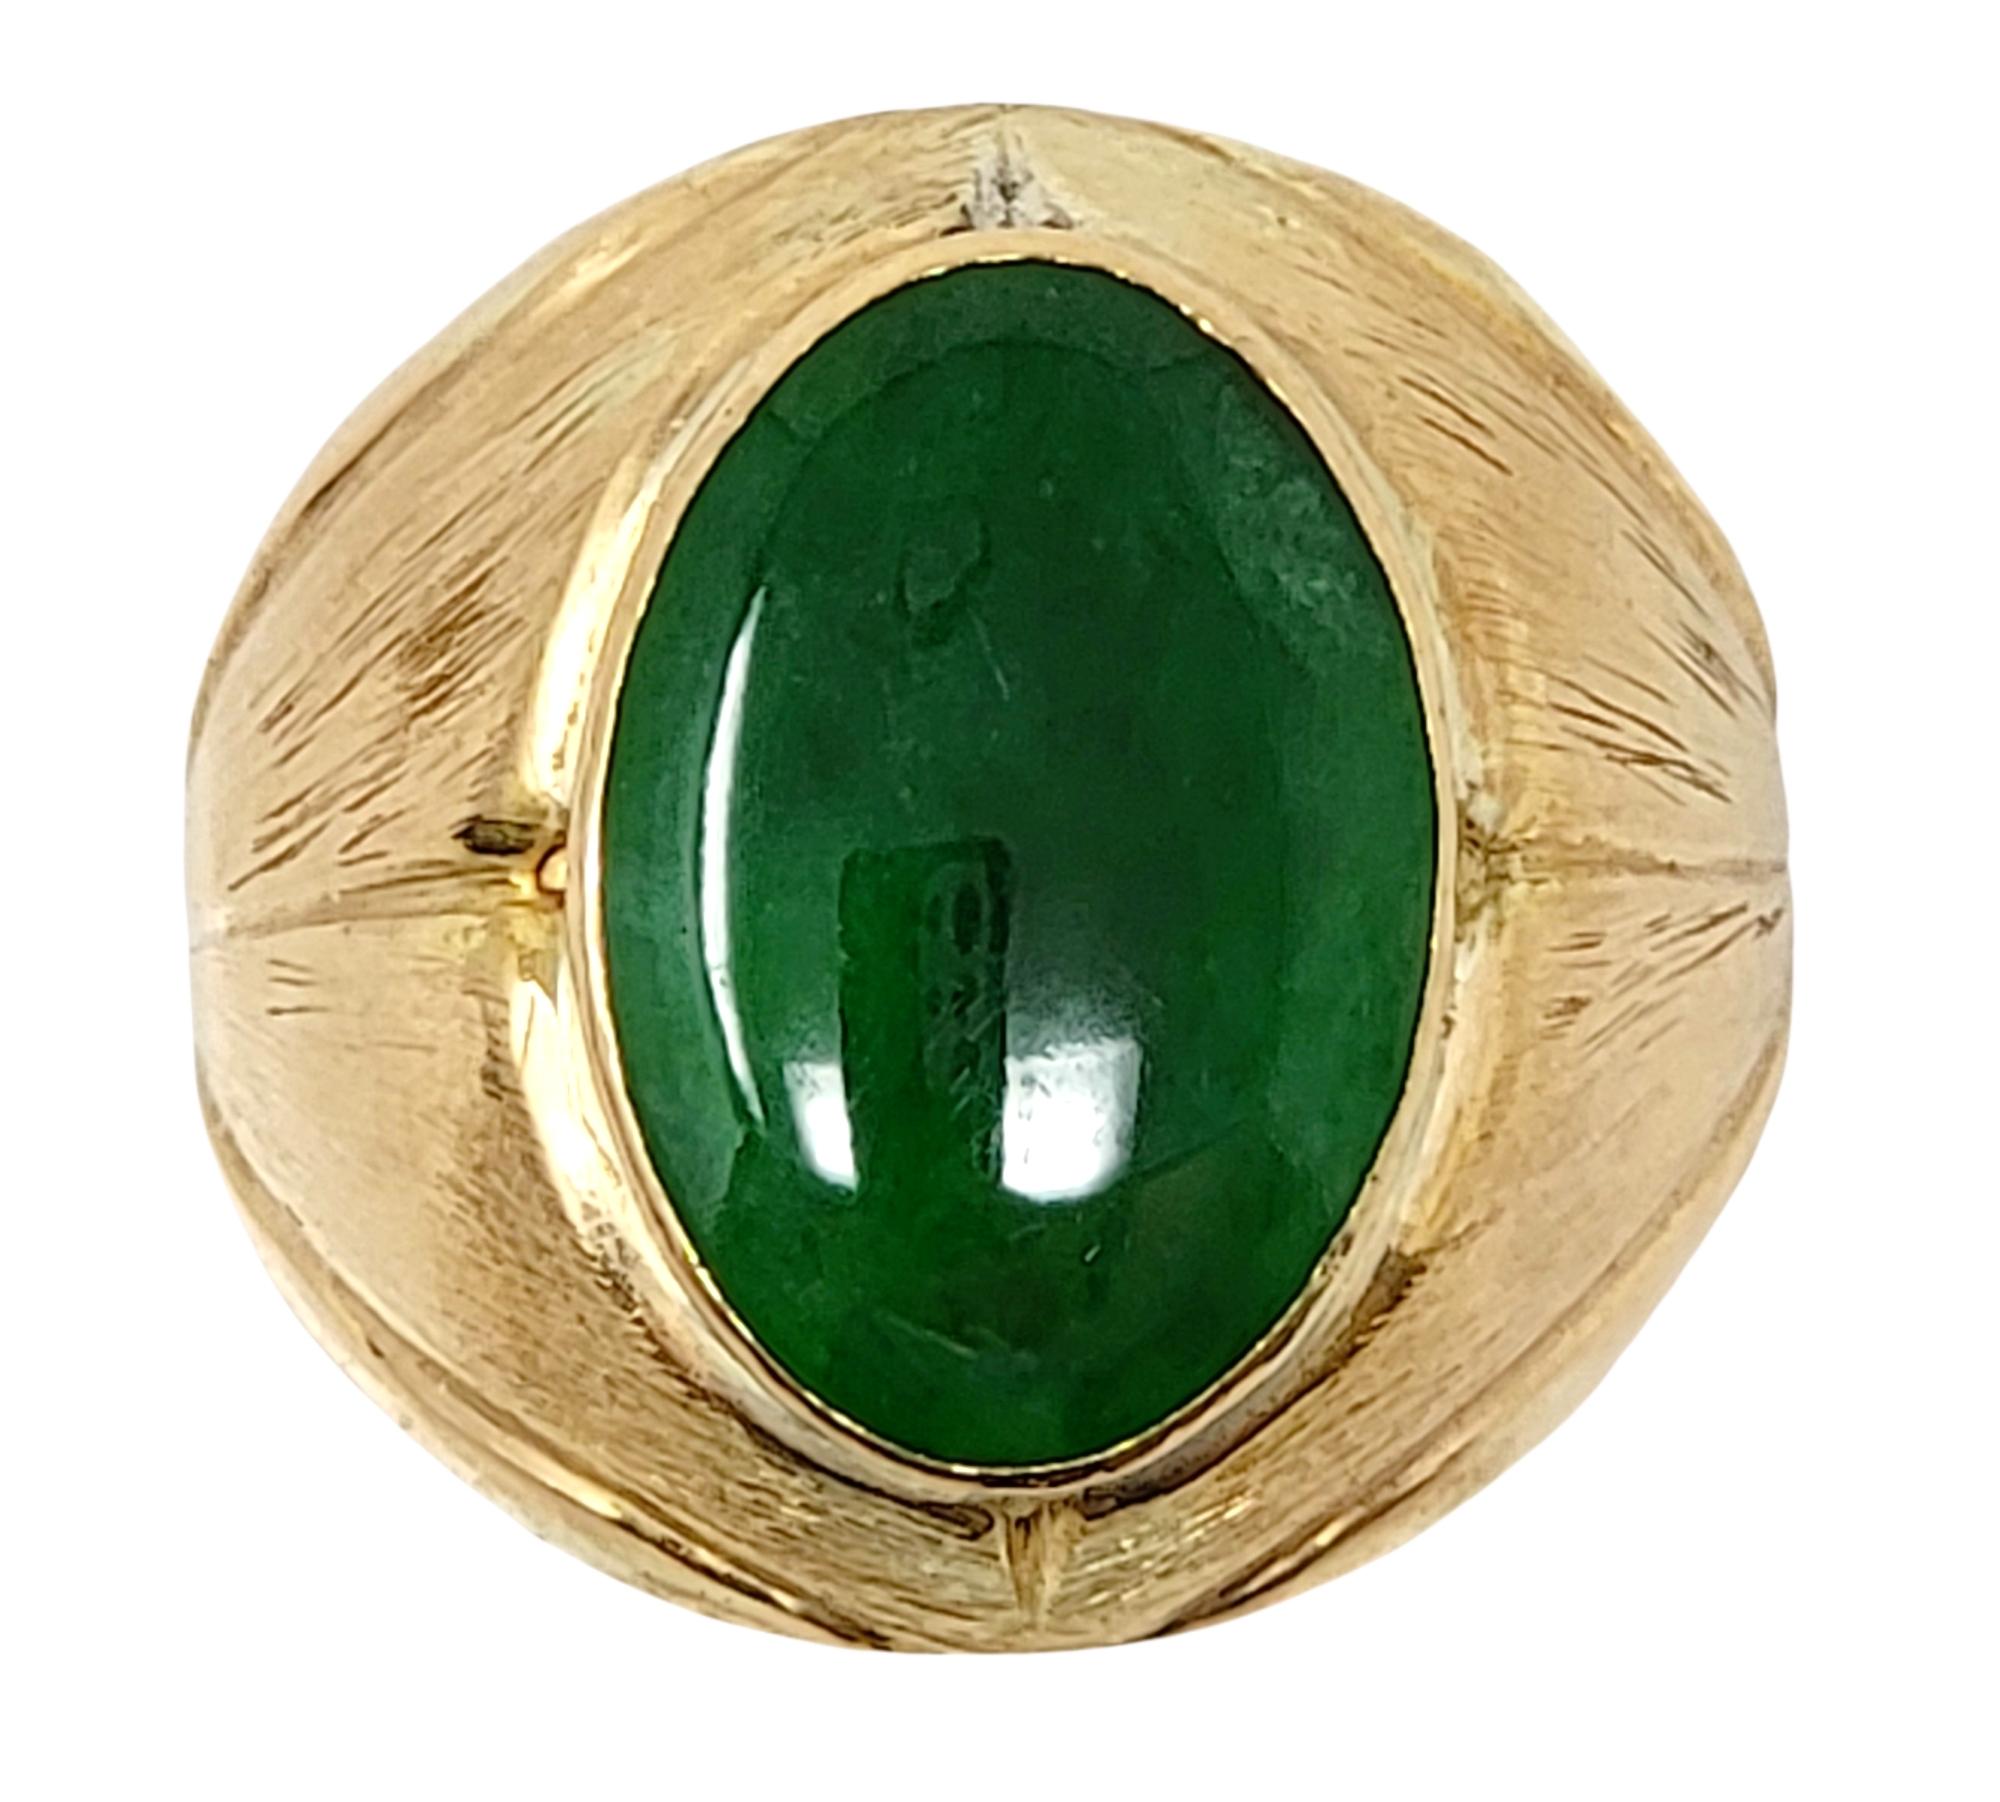 Ring size: 10.25

This bold 18 karat yellow gold and Jadeite cocktail ring is substantial in size and offers a stunning pop of color as it fills the finger. This is an undyed Jadeite cabochon stone, semi translucent, in a dark green color. 

Ring